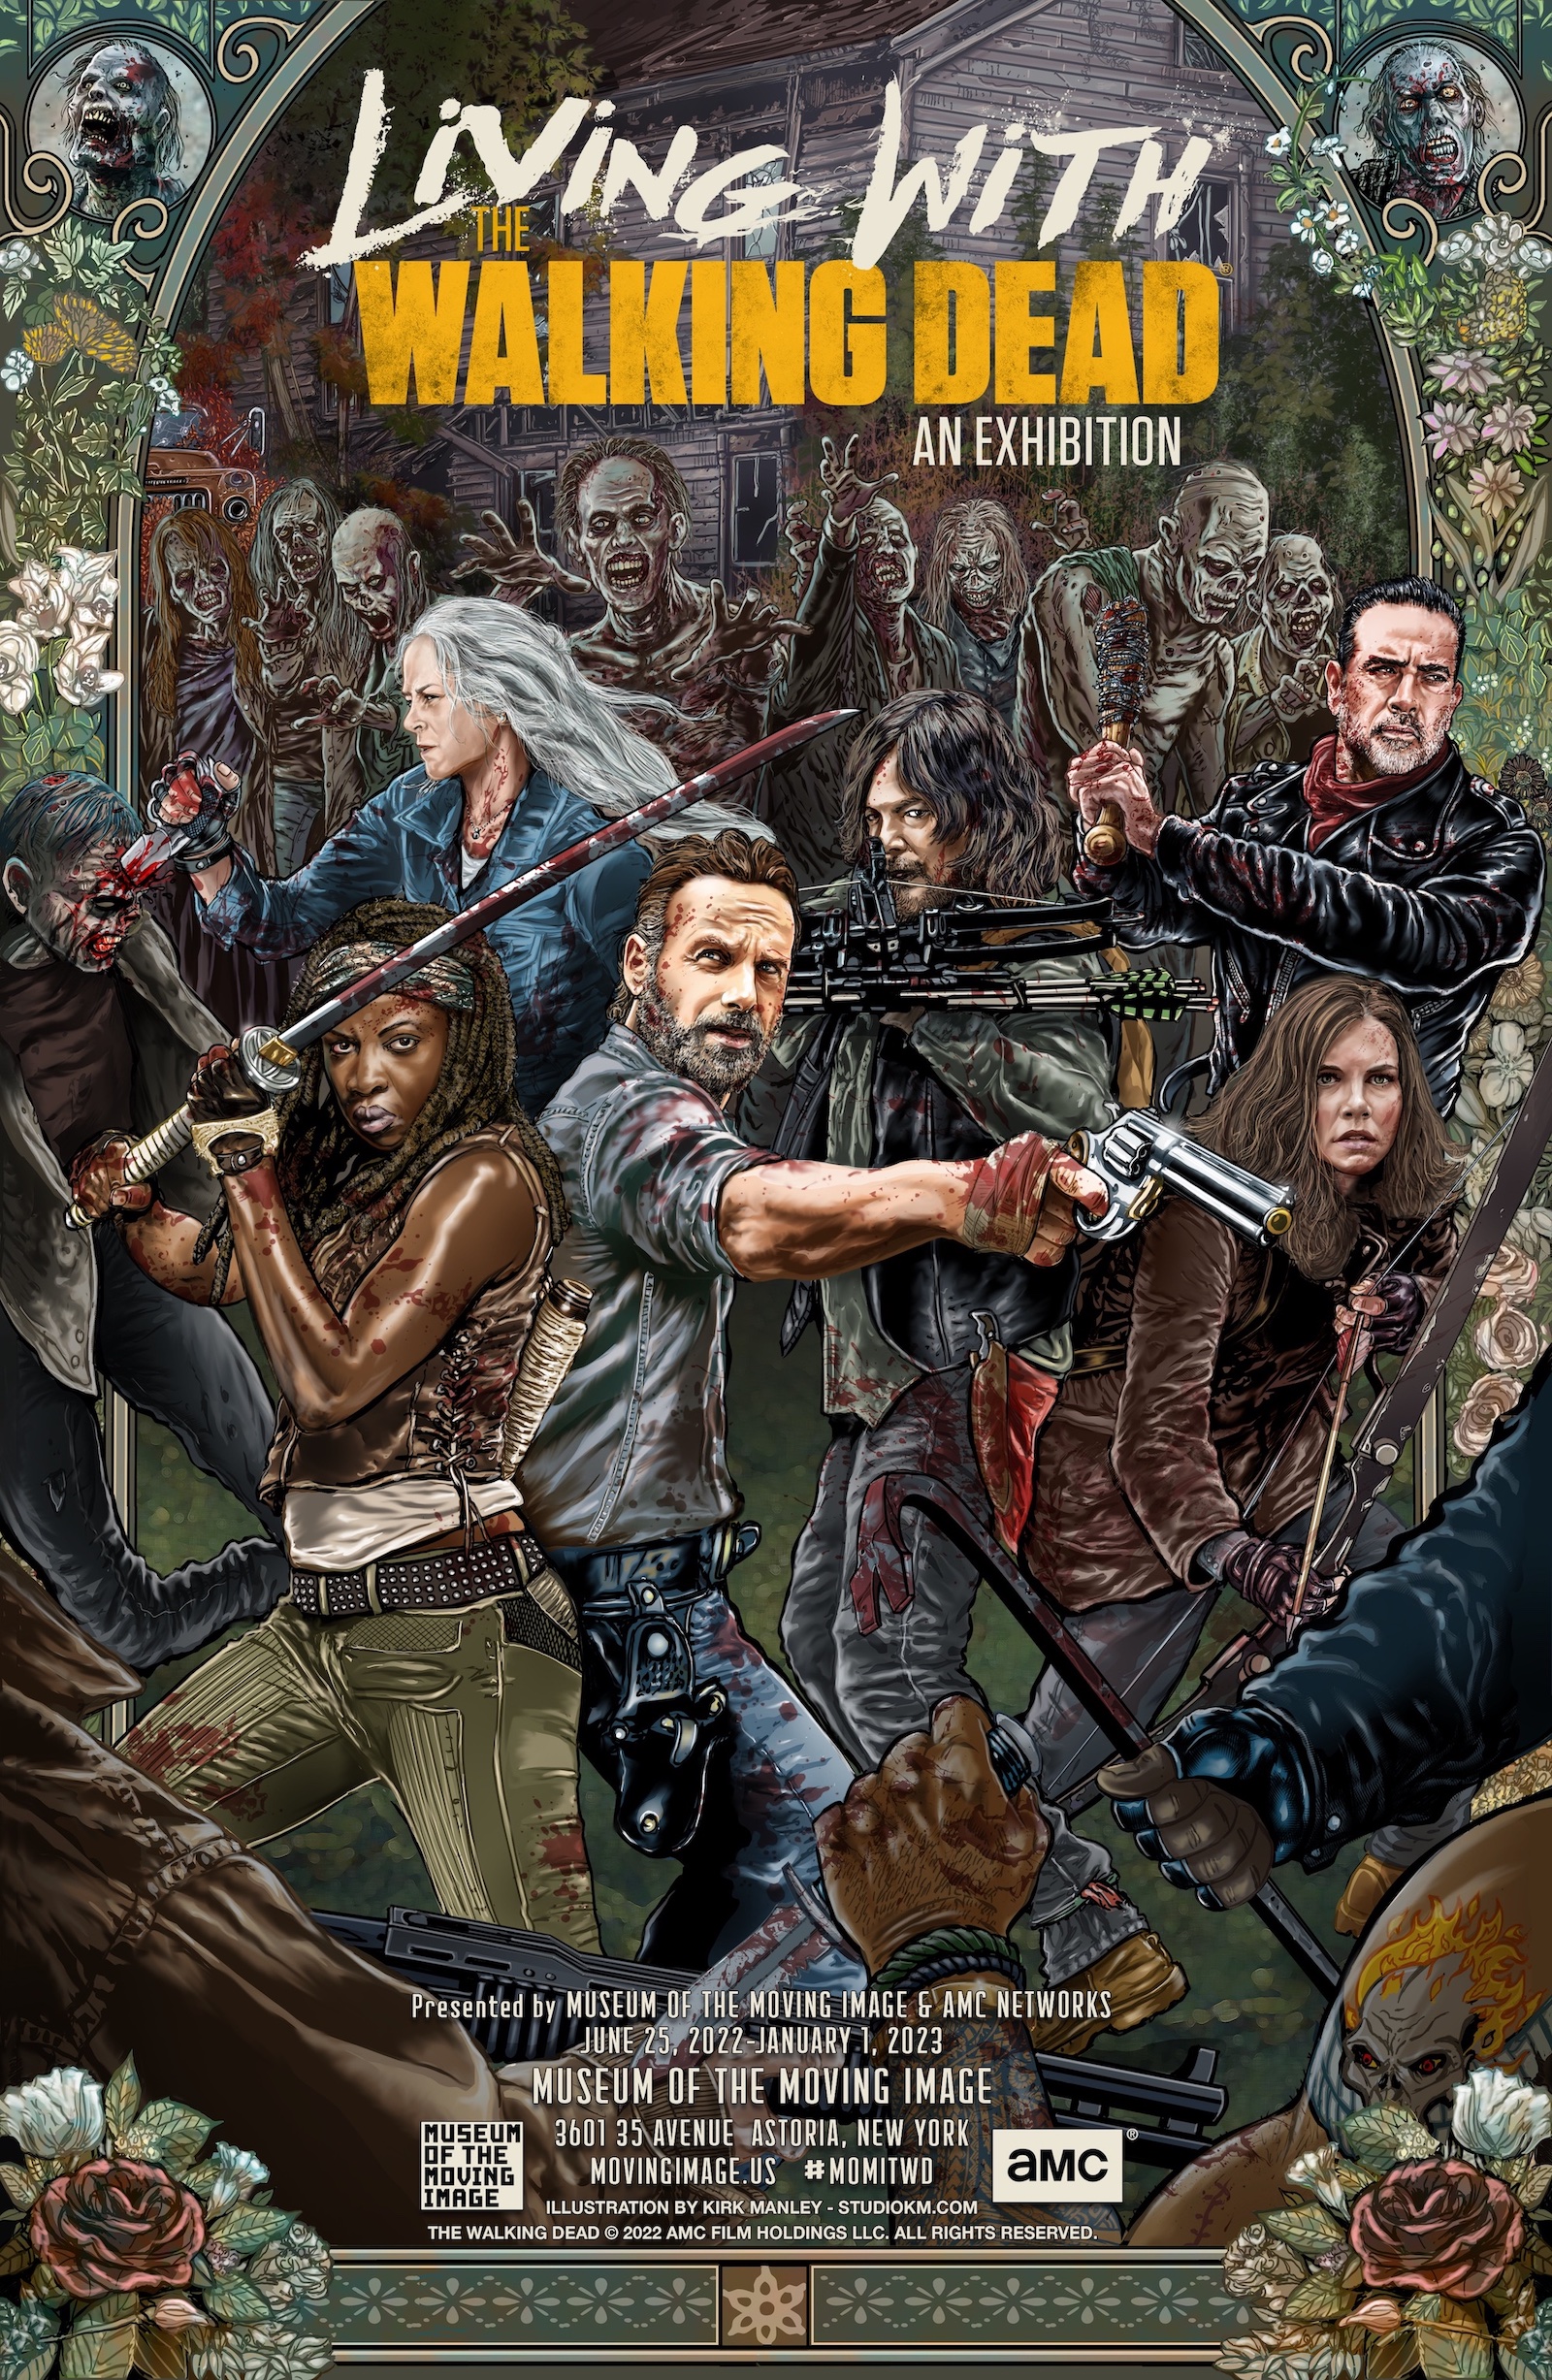 hand-drawn art in color showing six main characters from The Walking Dead surrounded by zombies and a delicate floral frame around the edge